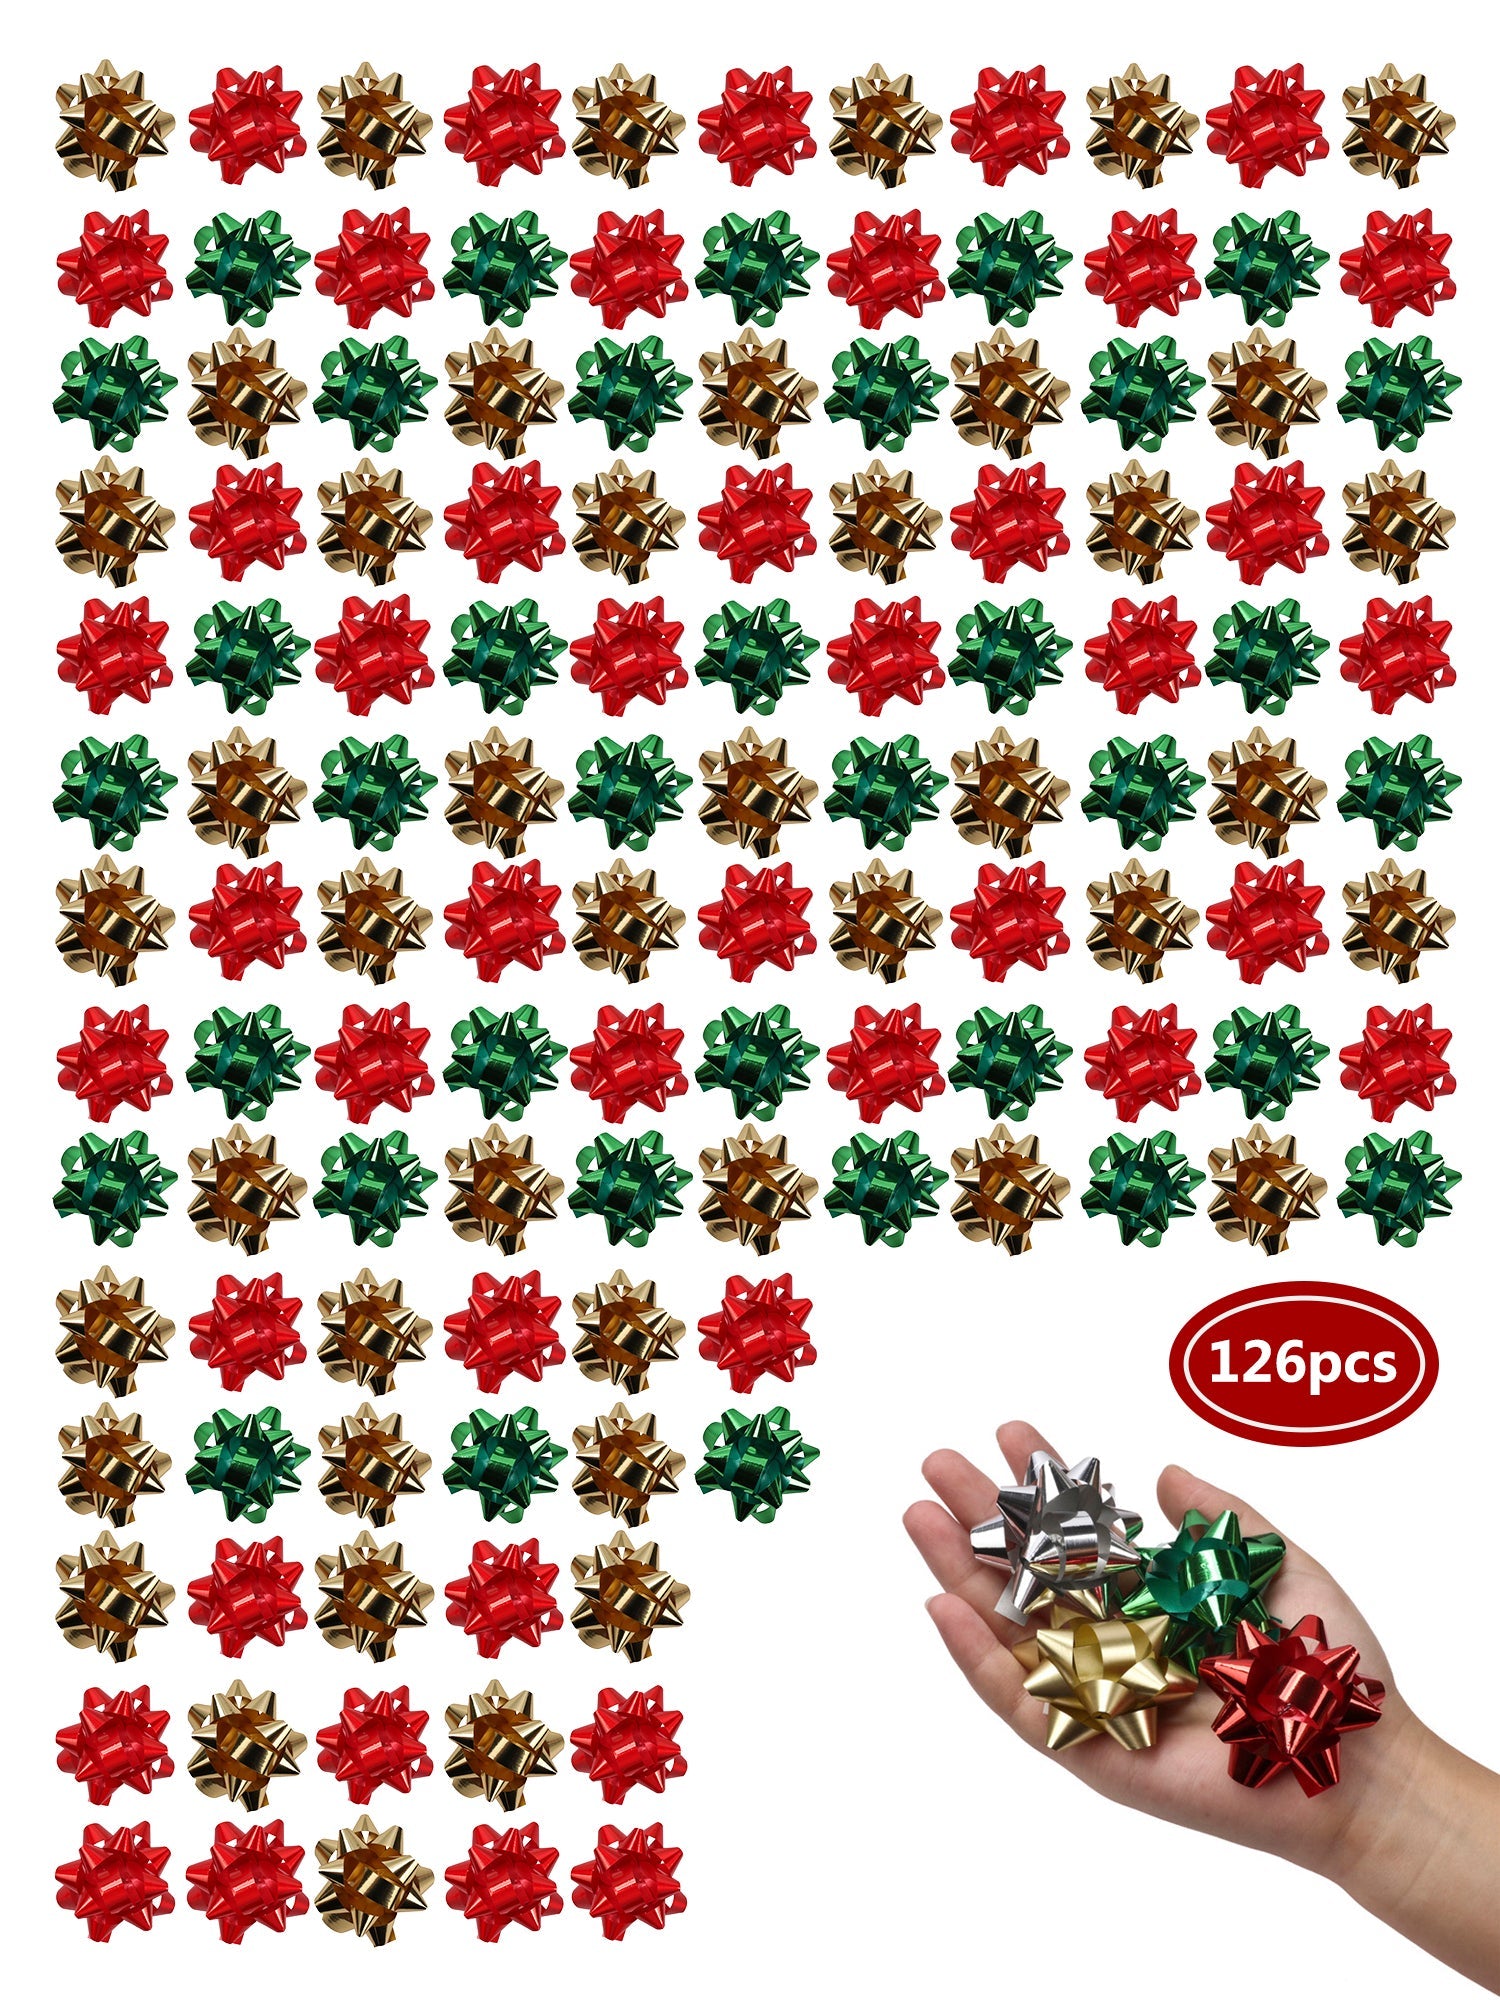 2" Christmas Star Gift Bow Bundle - Gold/Green/Apple Red -  126 pcs